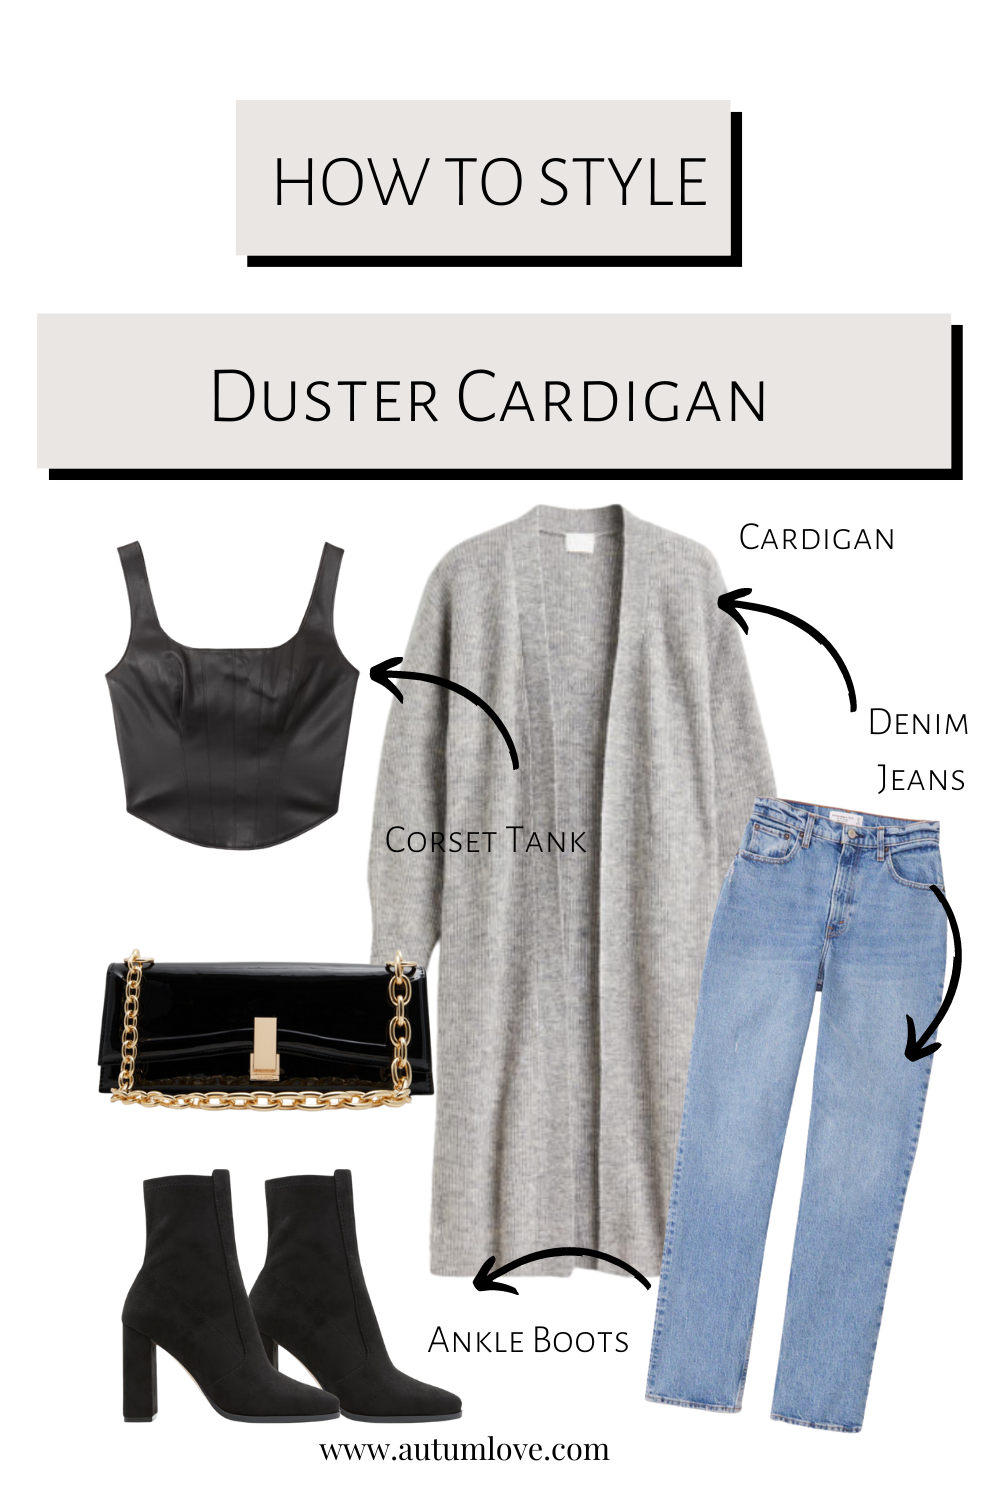 How To Style A Cardigan In A Stylish Way — Autum Love